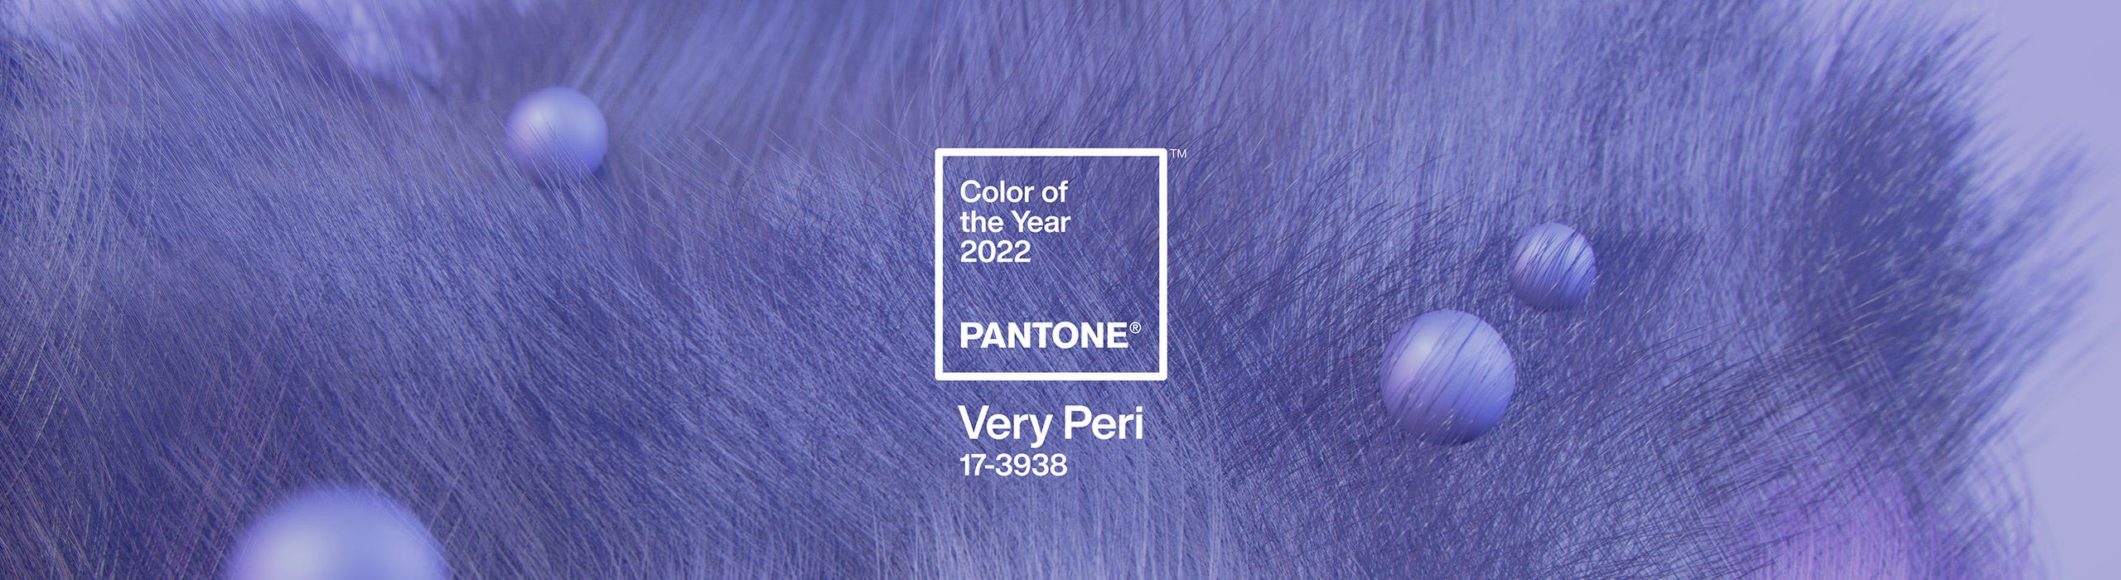 Pantone’s color of the year mixes the consistency of blue with the passion of red, Pantone said.